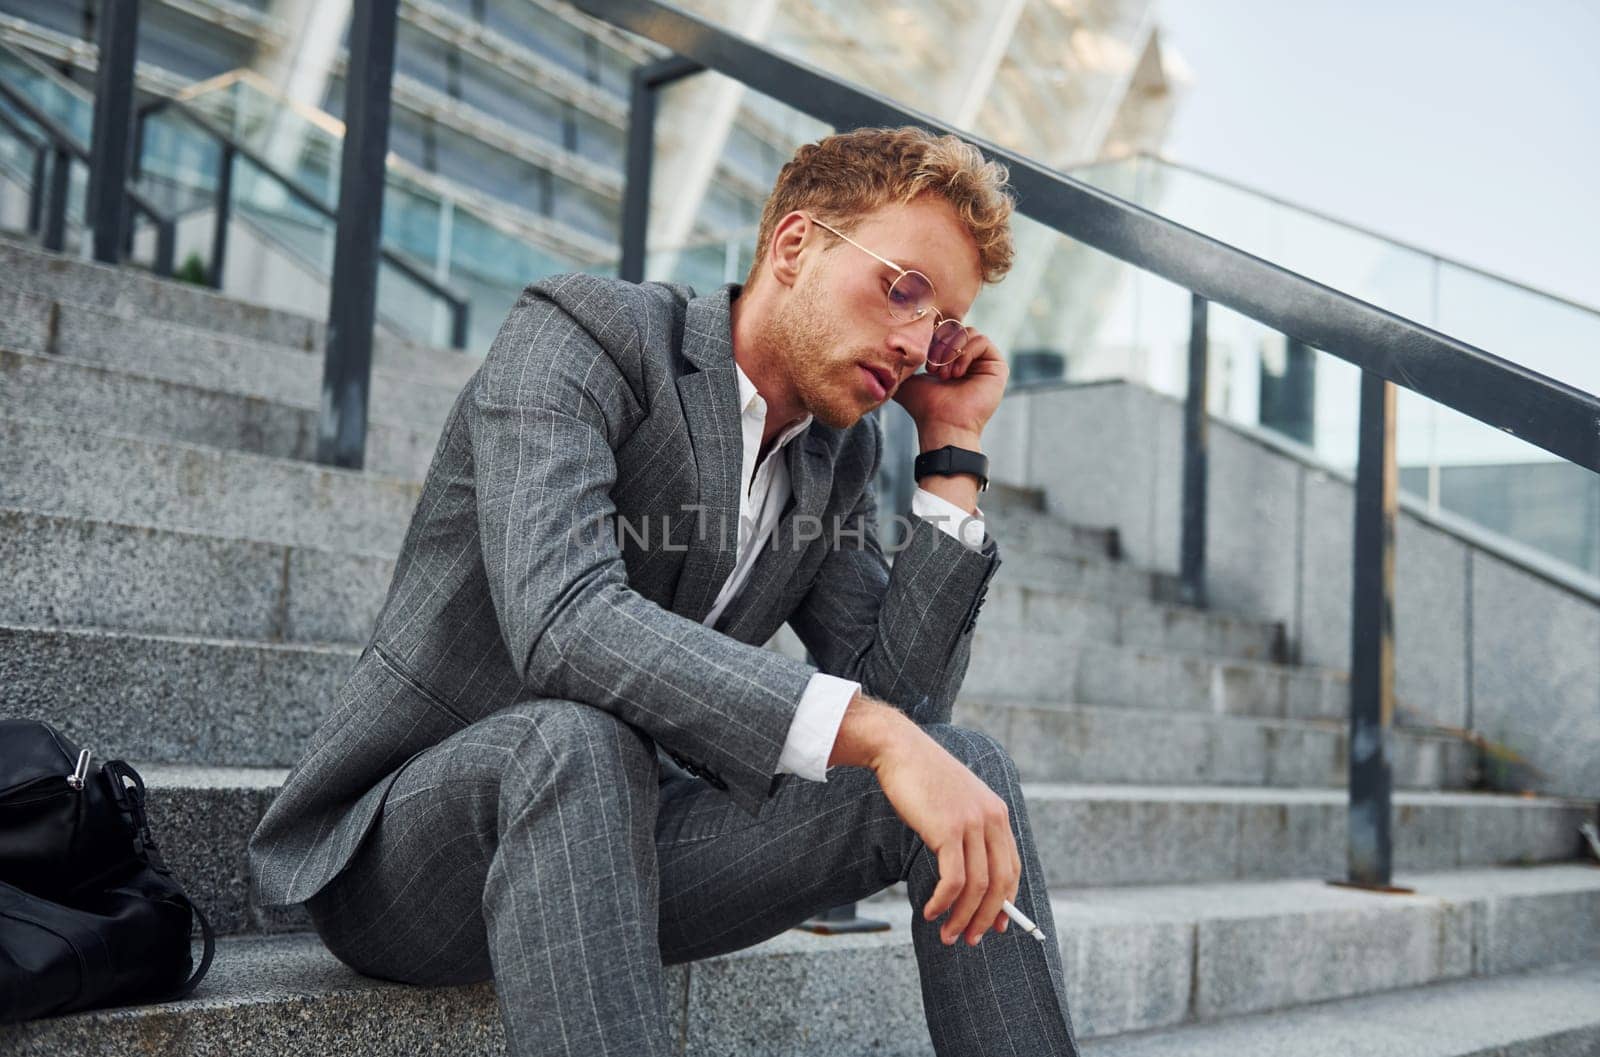 Smoking cigarette. Young businessman in grey formal wear is outdoors in the city.